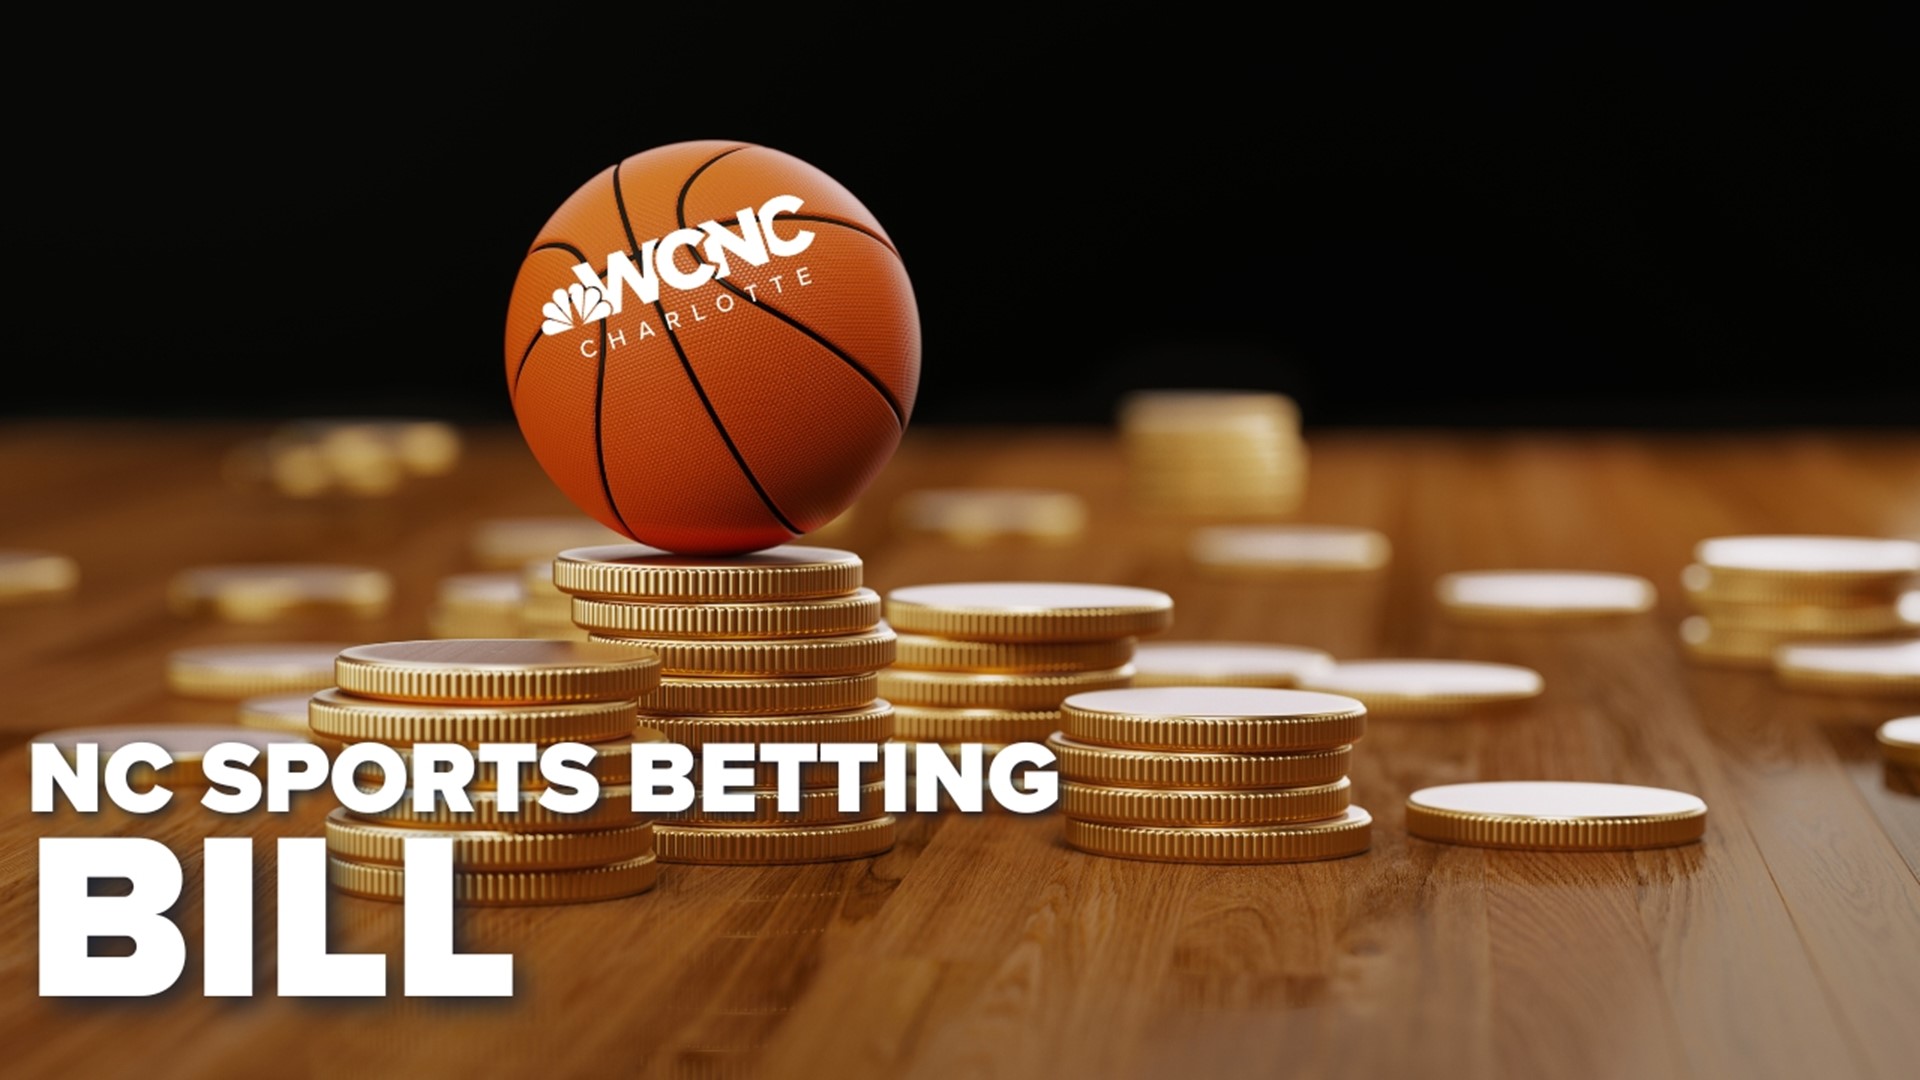 The bill to make mobile sports betting legal recently passed the state House and is expected to have majority support in the Senate.